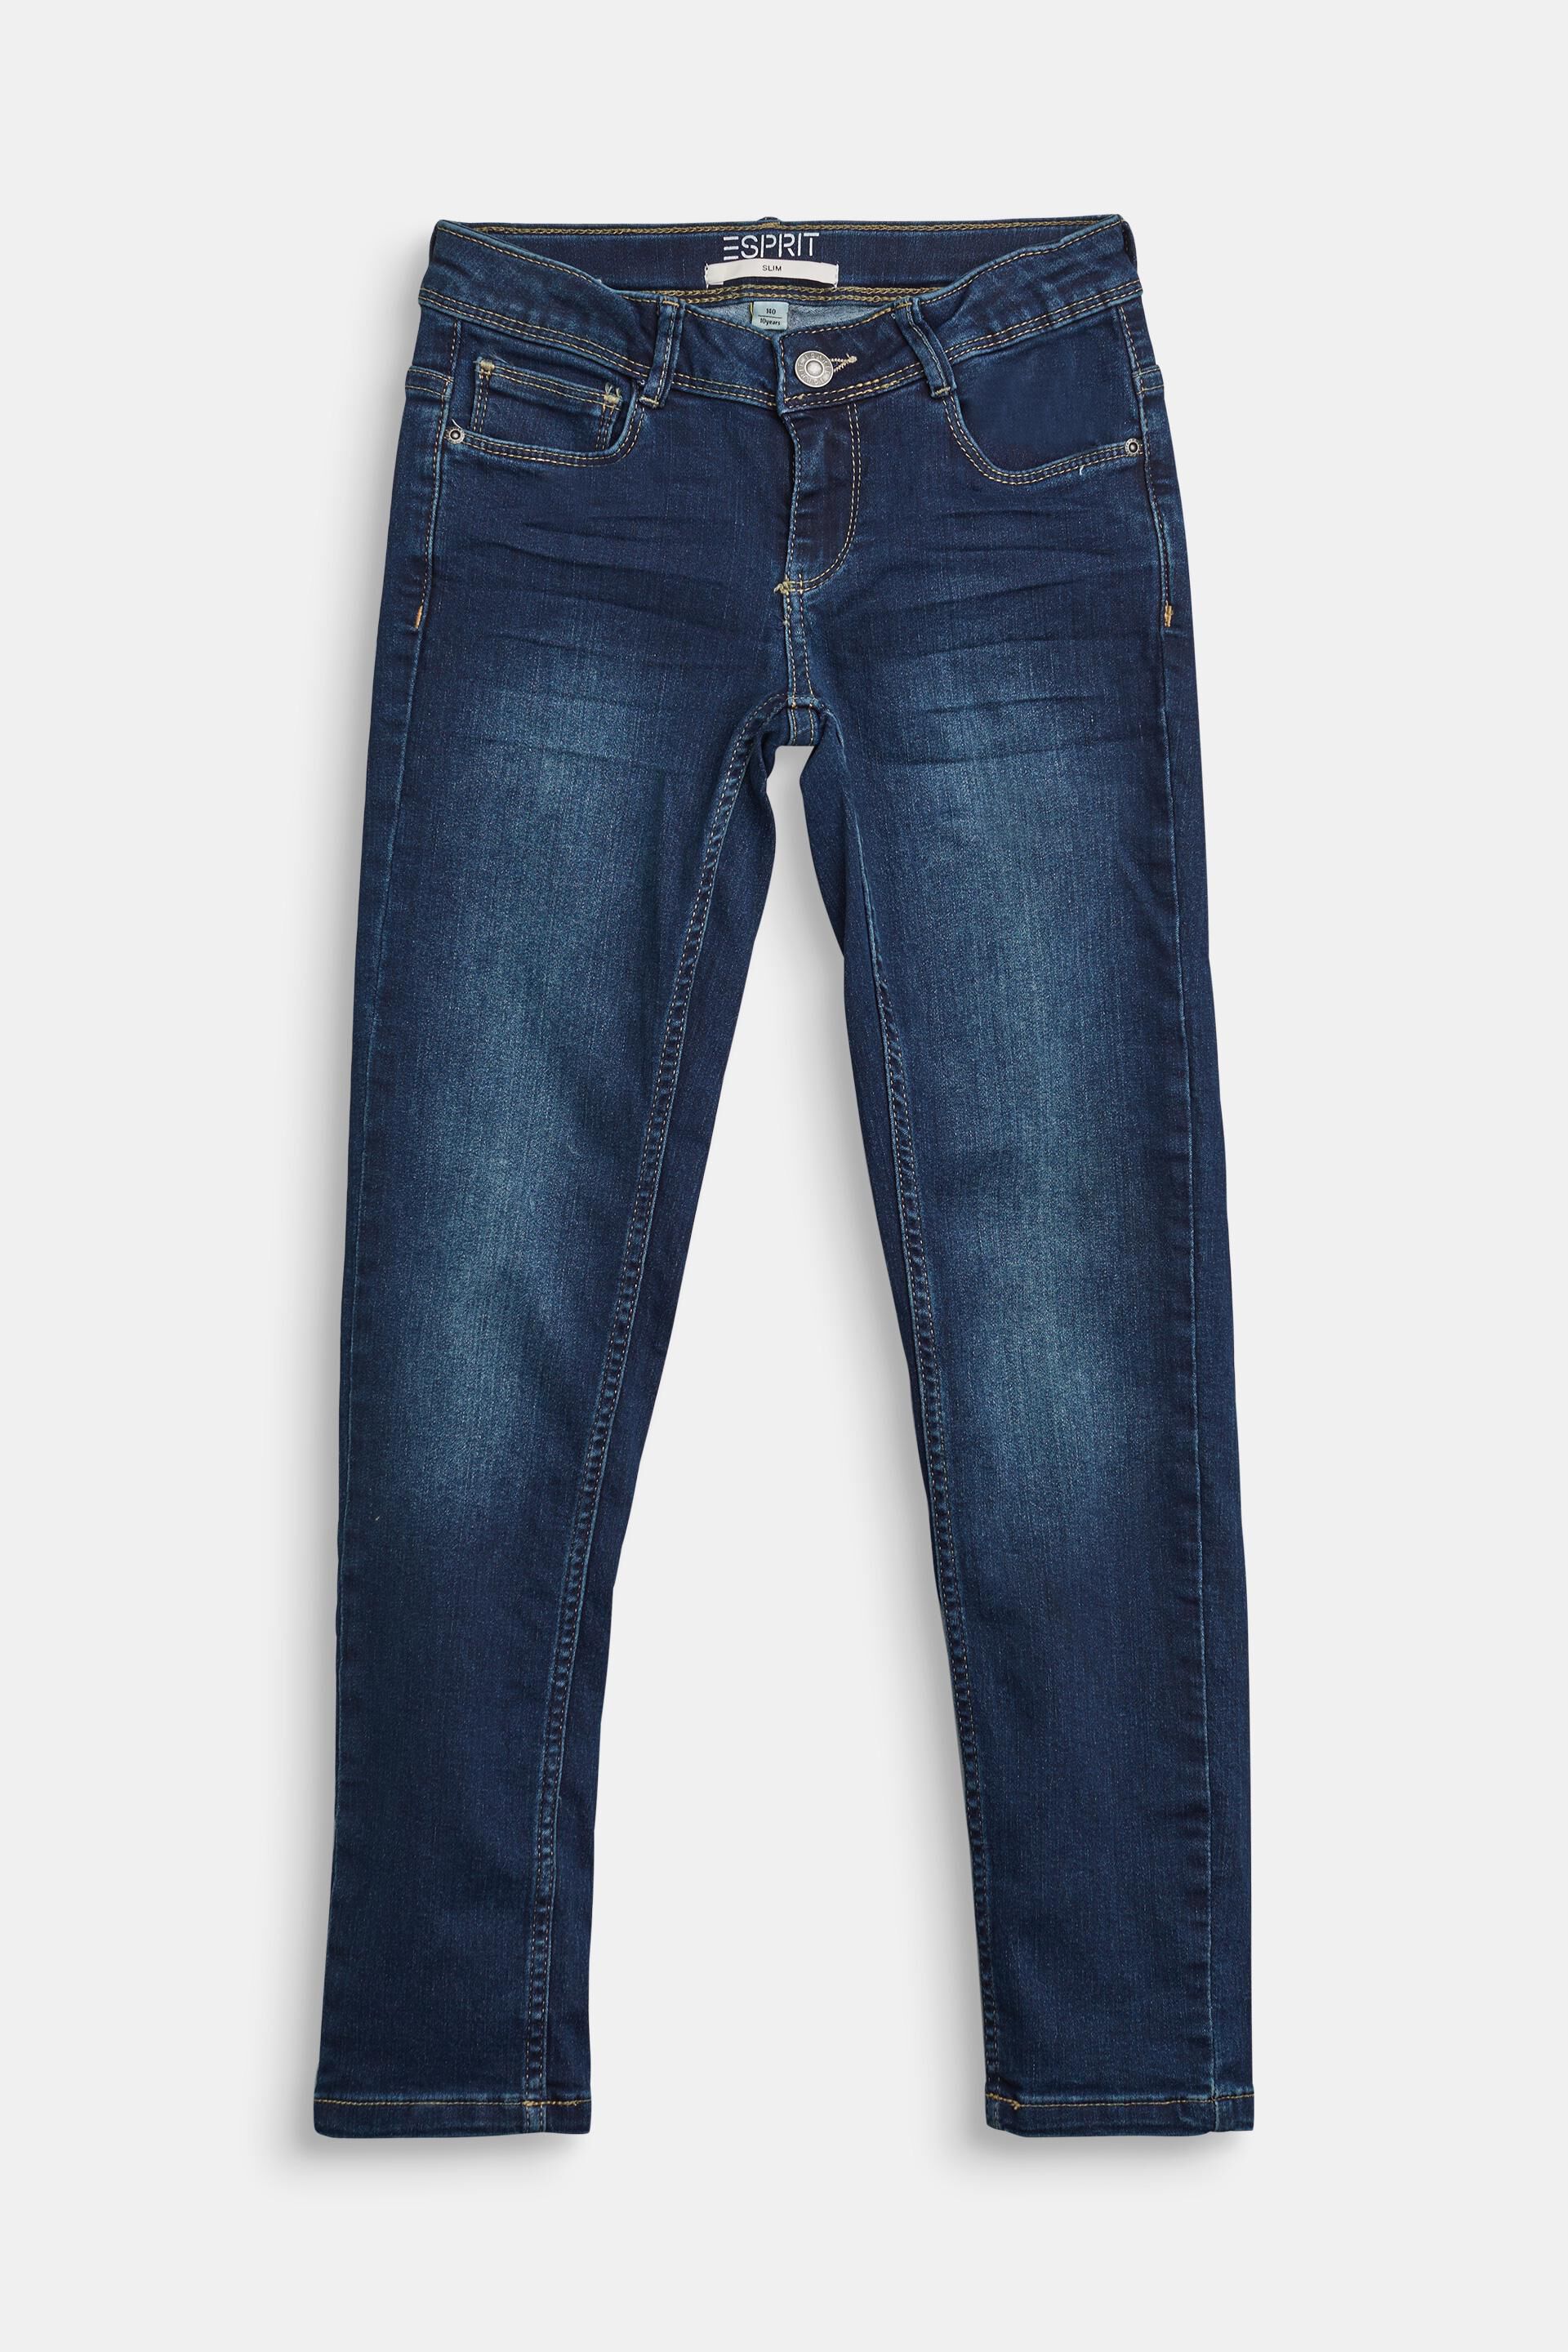 Esprit widths Stretch different with jeans adjustable in an waistband available